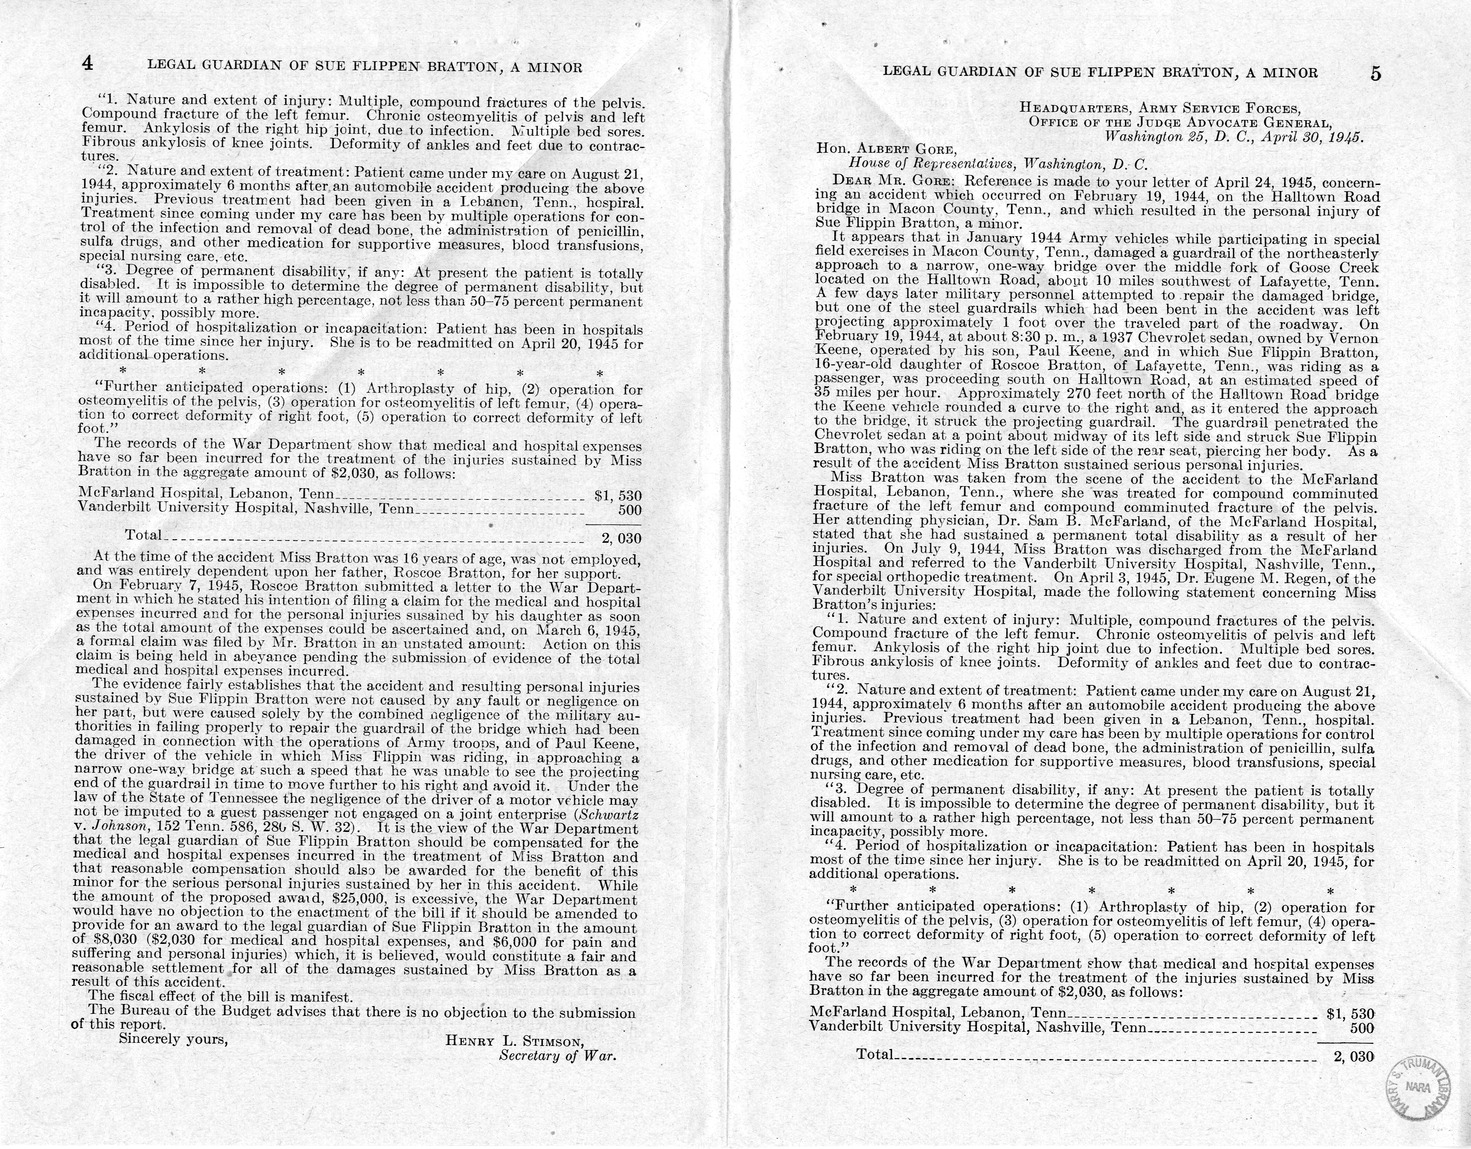 Memorandum from Frederick J. Bailey to M. C. Latta, H.R. 3198, For the Relief of the Legal Guardian of Sue Flippin Bratton, a Minor, with Attachments